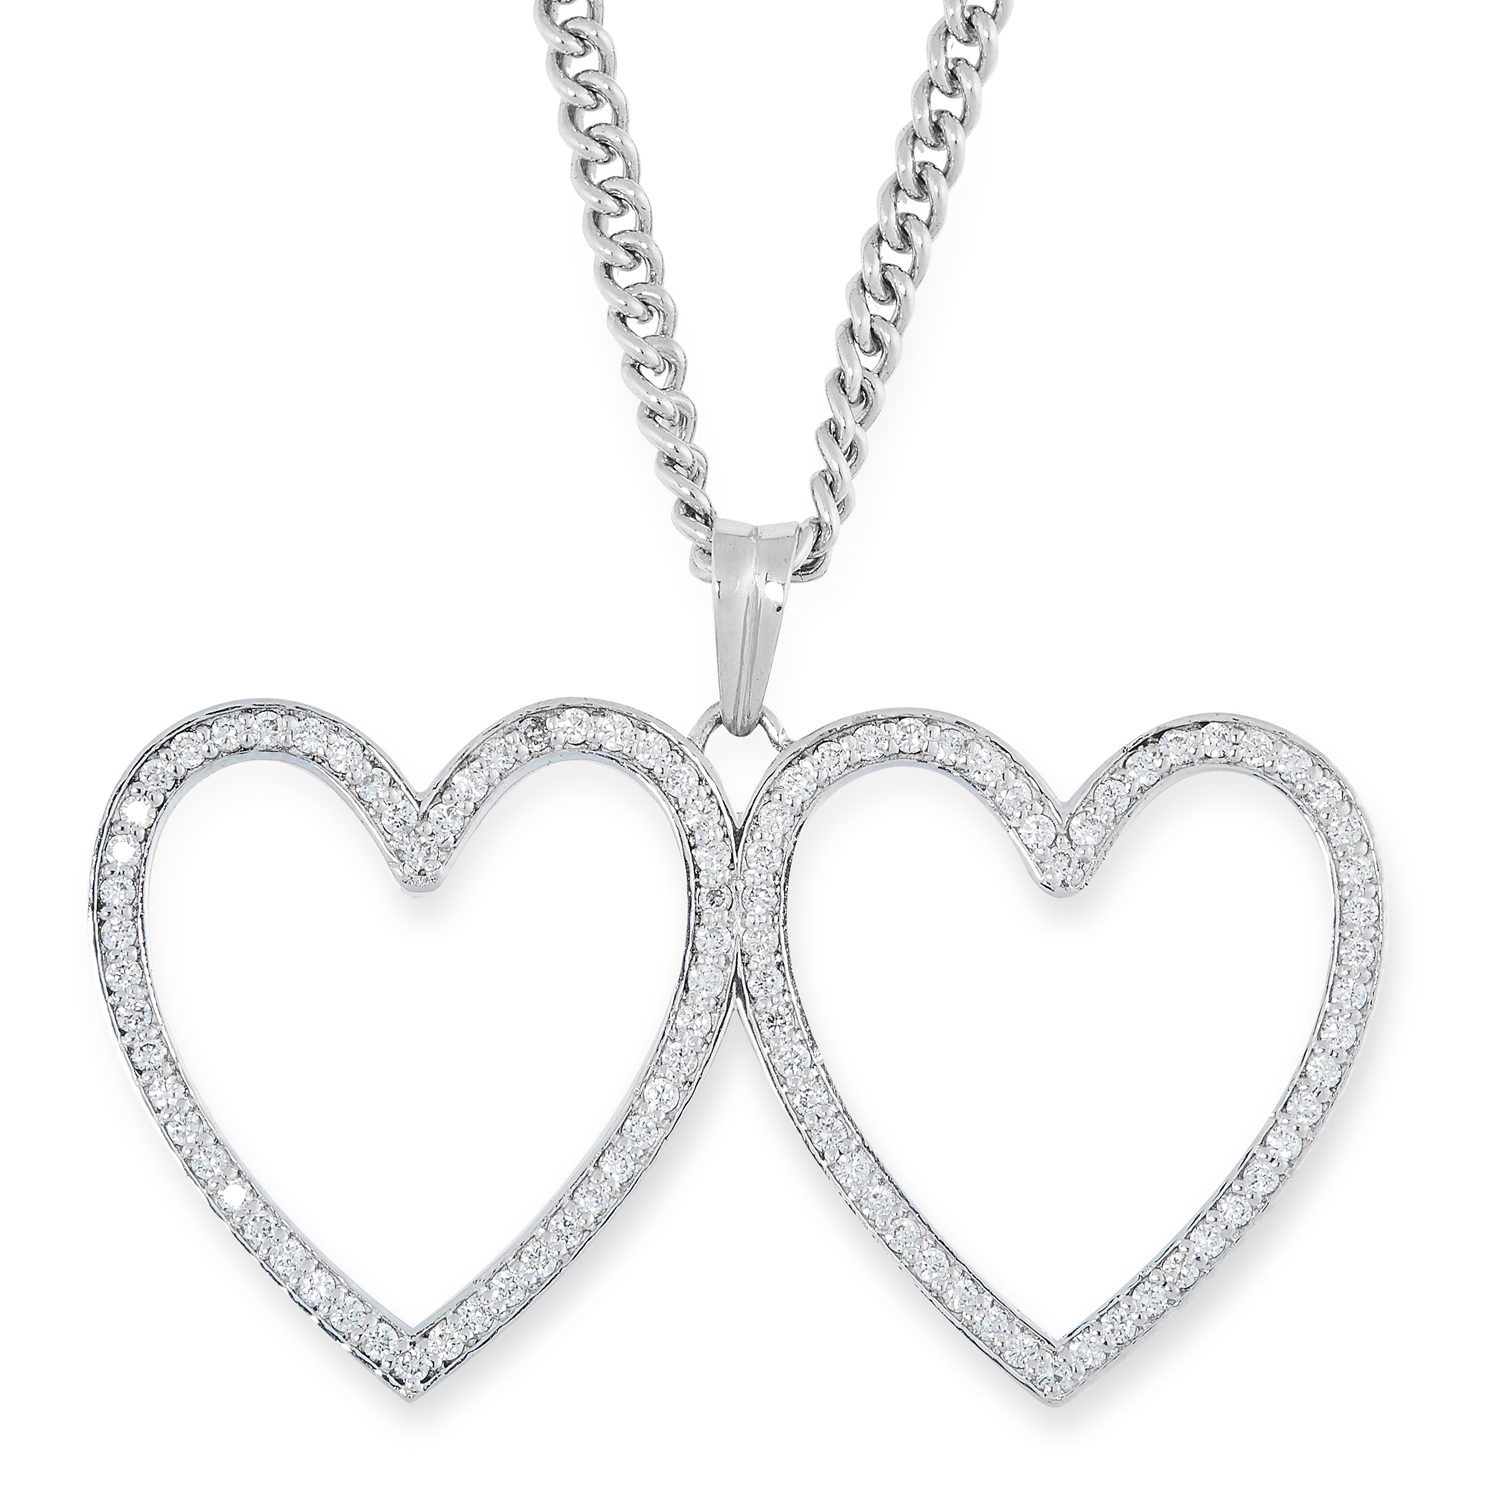 A DOUBLE OPEN HEART PENDANT AND CHAIN the double open heart pendant set with 1.03 carats of round